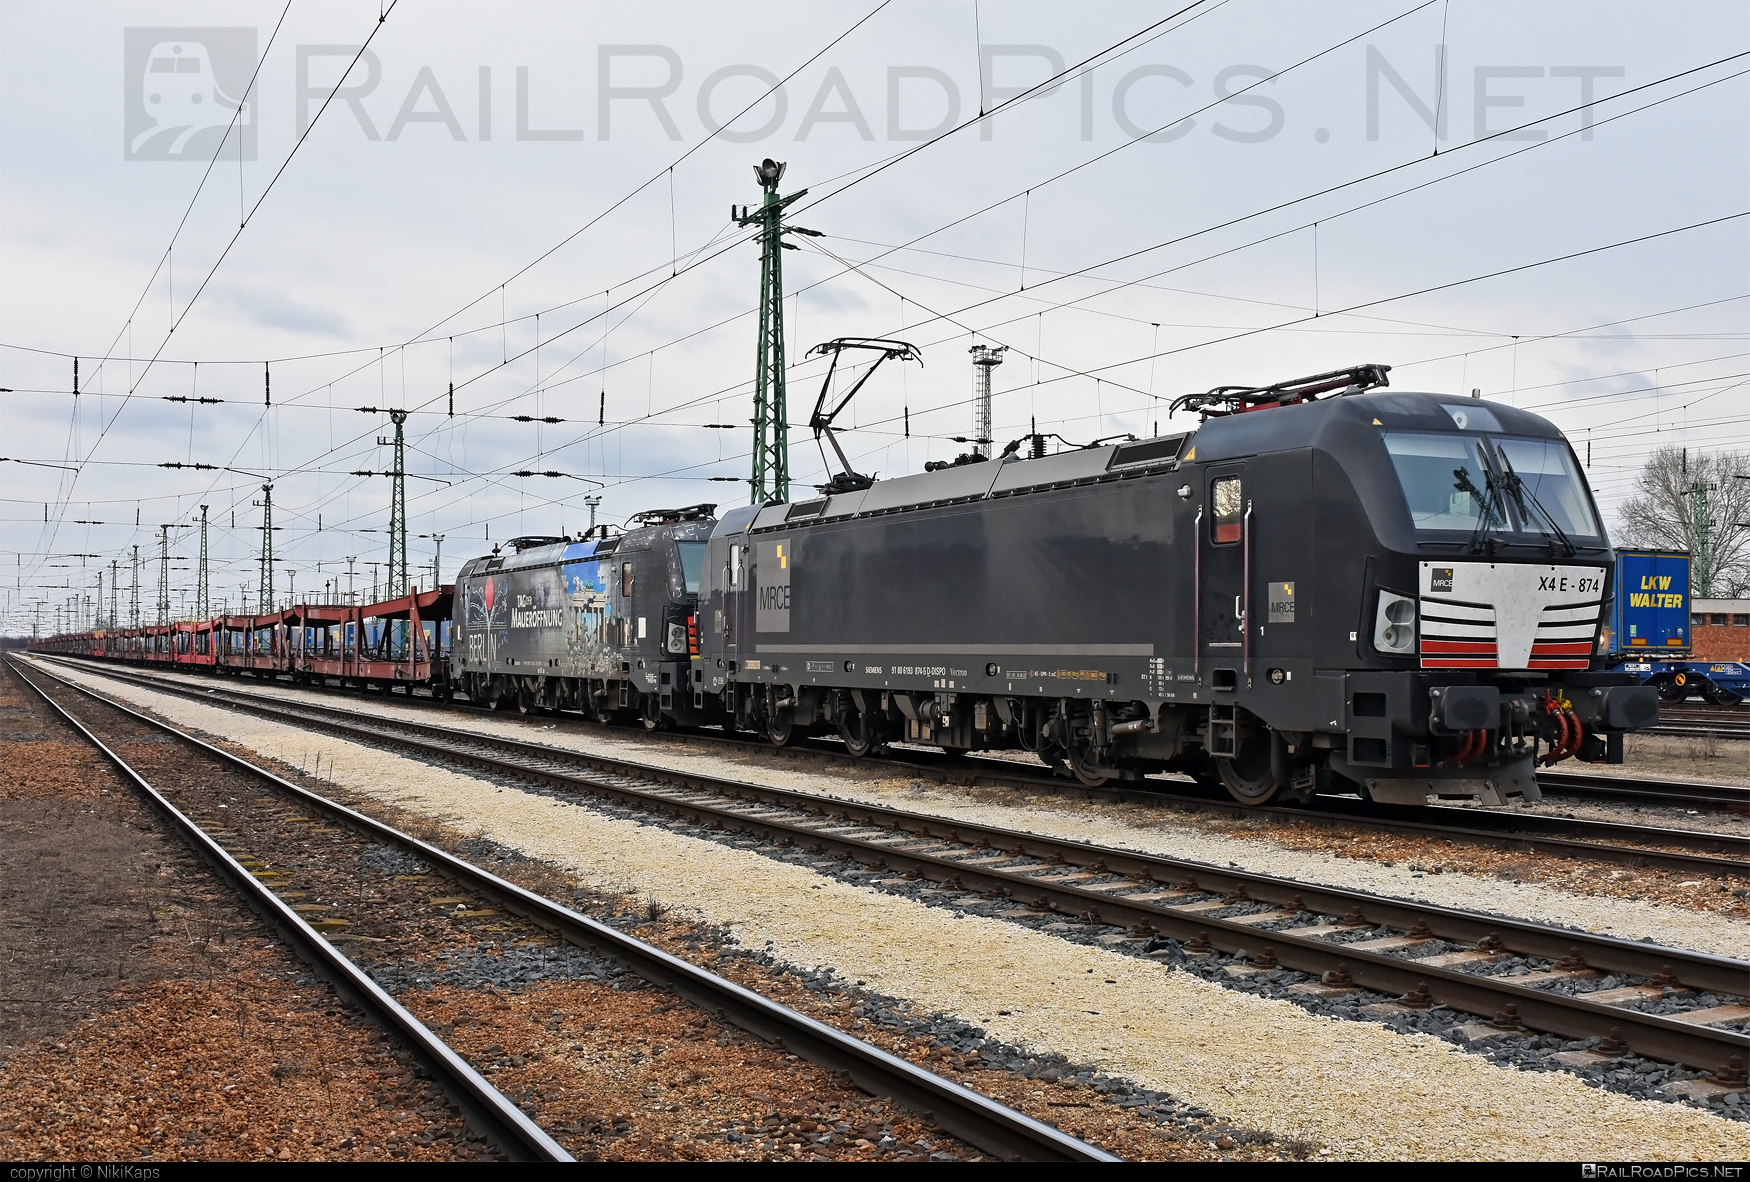 Siemens Vectron AC - 193 874 operated by LTE Logistik und Transport GmbH #carcarrierwagon #dispolok #lte #ltelogistikundtransport #ltelogistikundtransportgmbh #mitsuirailcapitaleurope #mitsuirailcapitaleuropegmbh #mrce #siemens #siemensVectron #siemensVectronAC #vectron #vectronAC